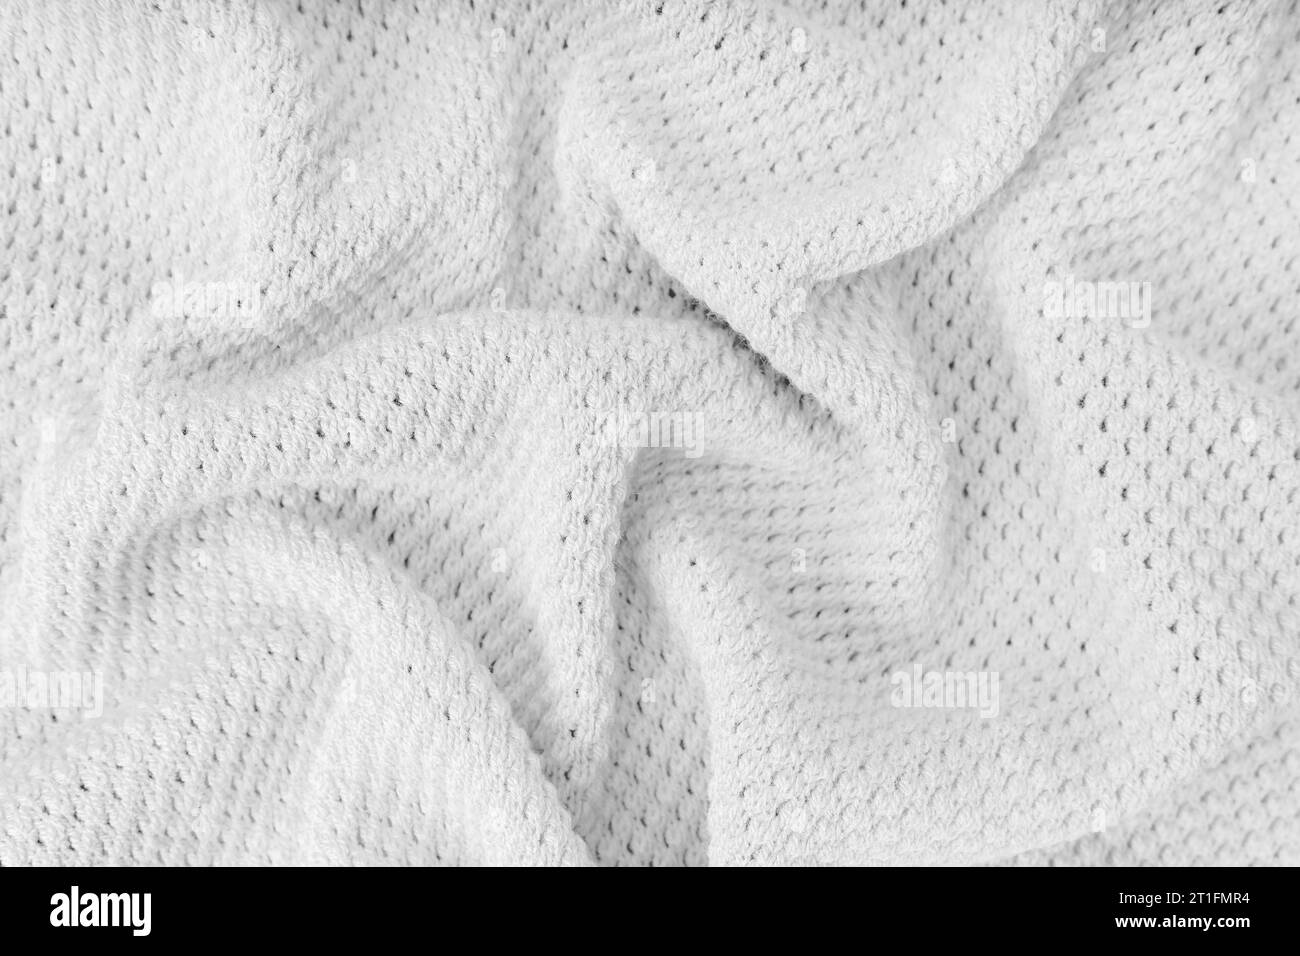 White color crumpled, wrinkled knitting wool cloth texture. Background of knitted fabric with dots pattern. Textile structure, cloth surface, weaving Stock Photo